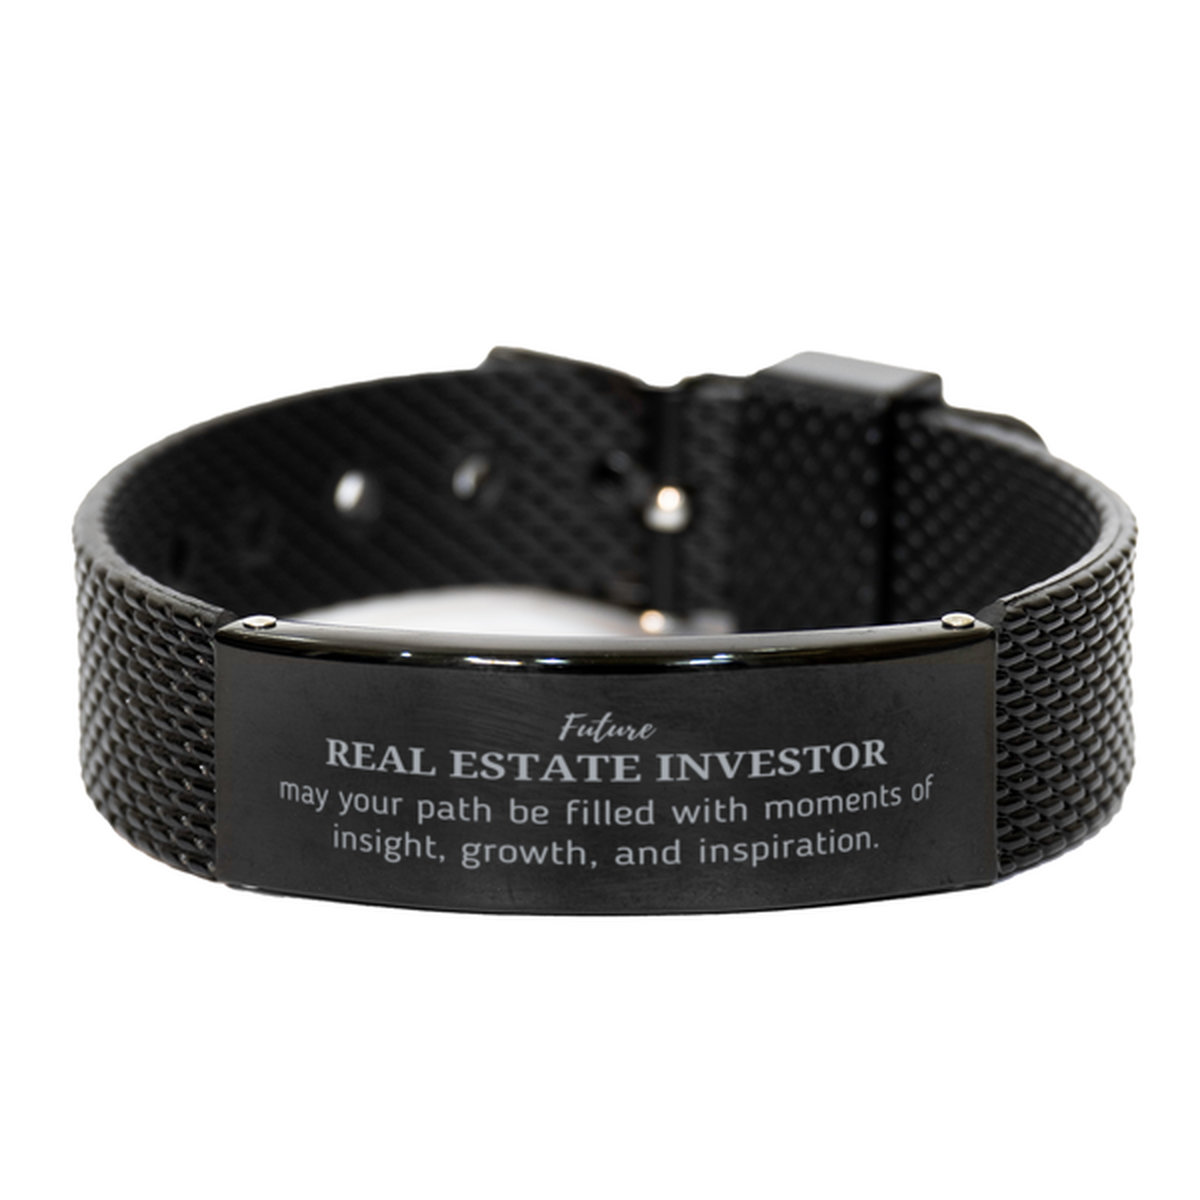 Future Real Estate Investor Gifts, May your path be filled with moments of insight, Graduation Gifts for New Real Estate Investor, Christmas Unique Black Shark Mesh Bracelet For Men, Women, Friends